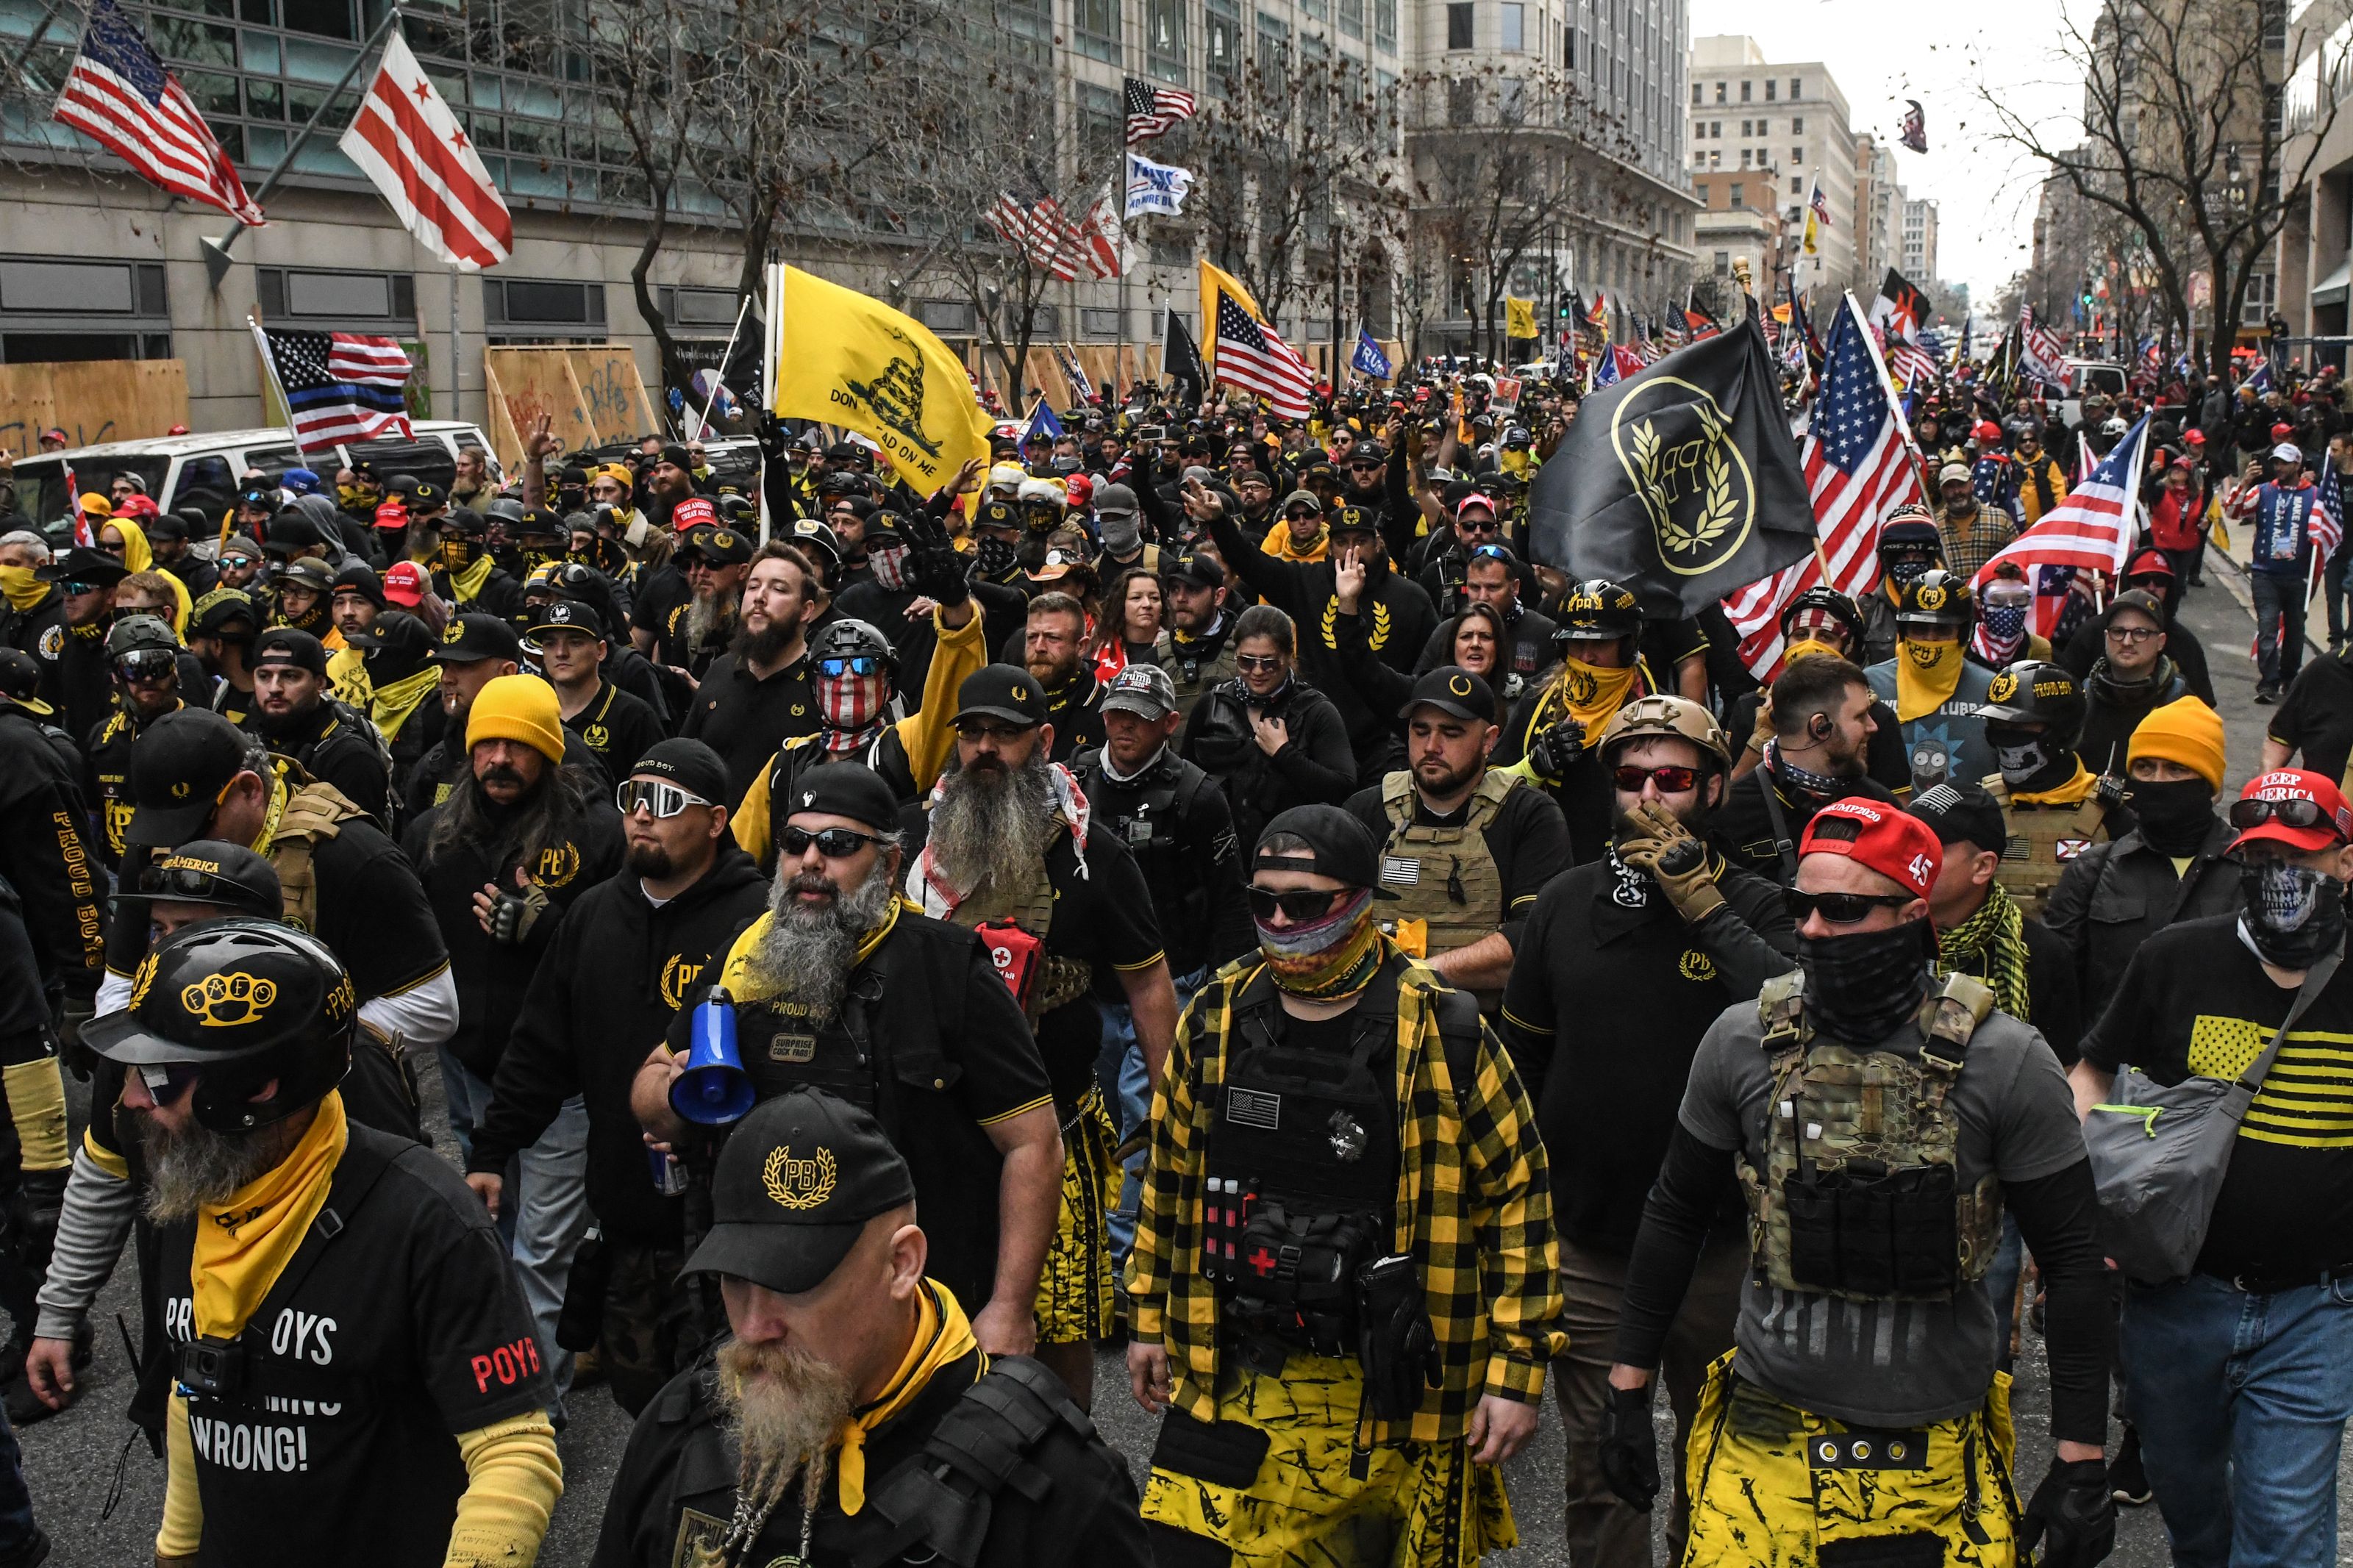 Members of the far-right Proud Boys march in D.C. 